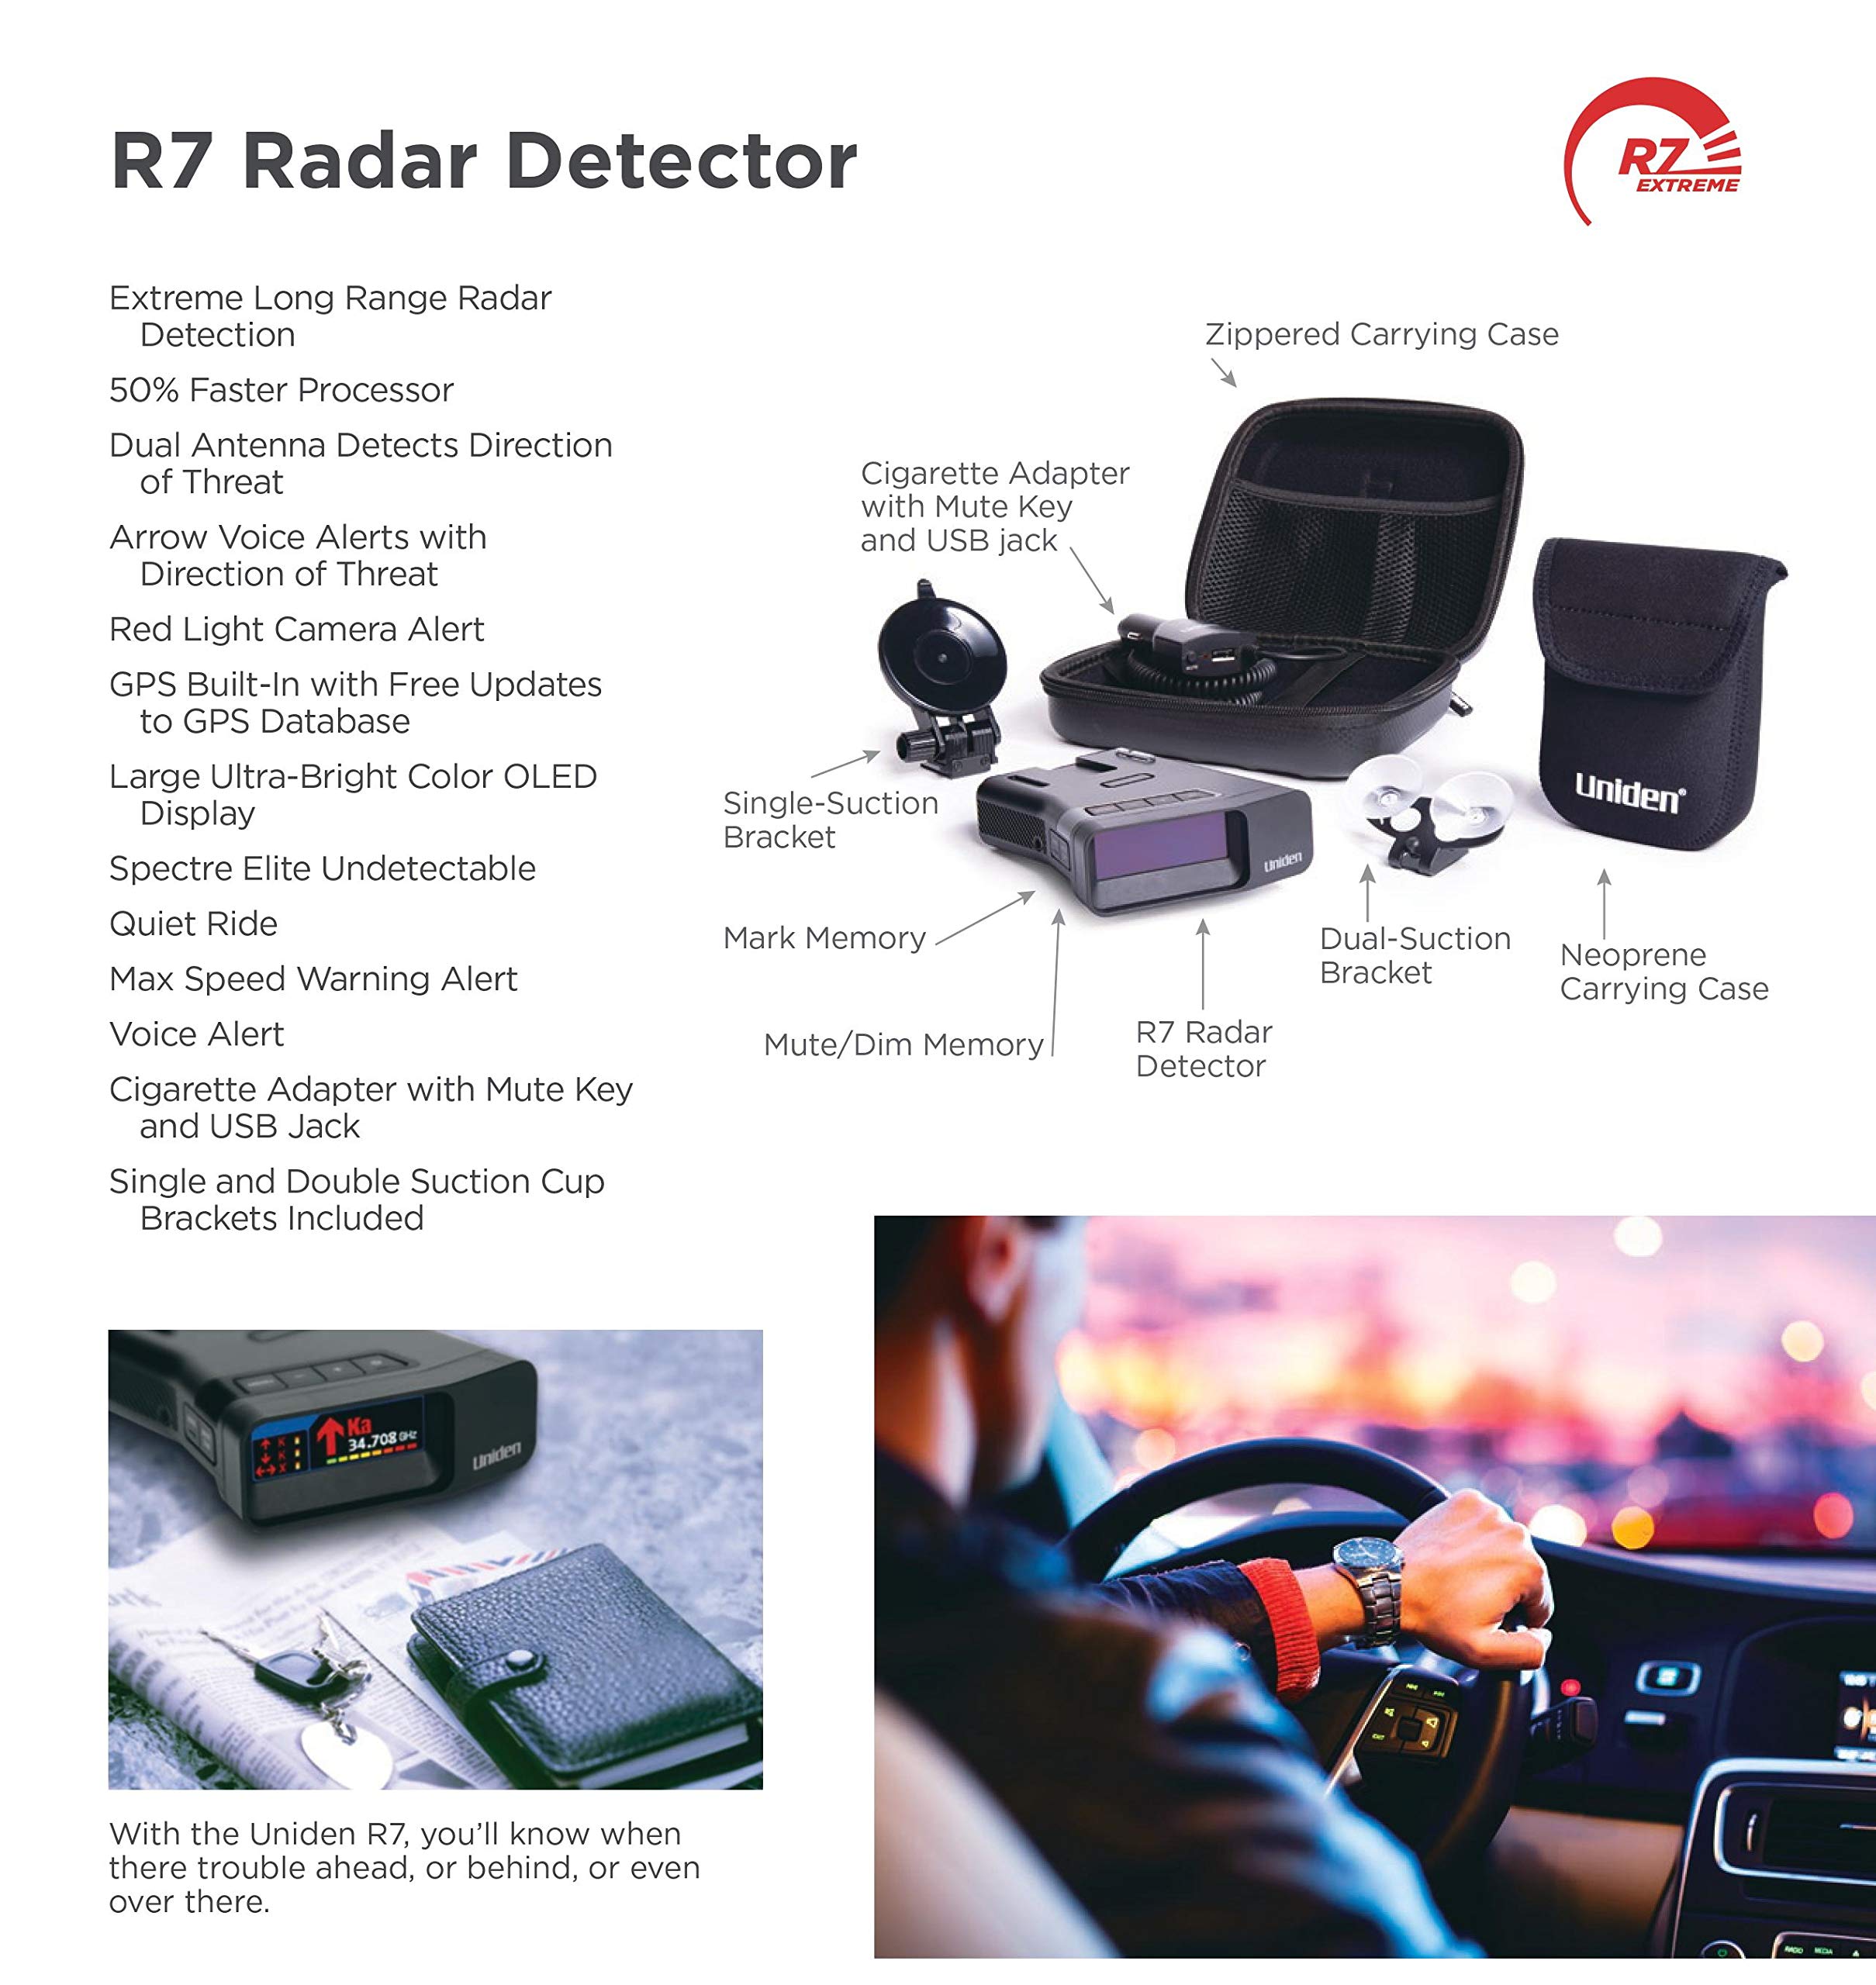 Uniden R7 EXTREME LONG RANGE Laser/Radar Detector, Built-in GPS, Real-Time Alerts, Dual-Antennas Front & Rear w/Directional Arrows, Voice Alerts, Red Light and Speed Camera Alerts